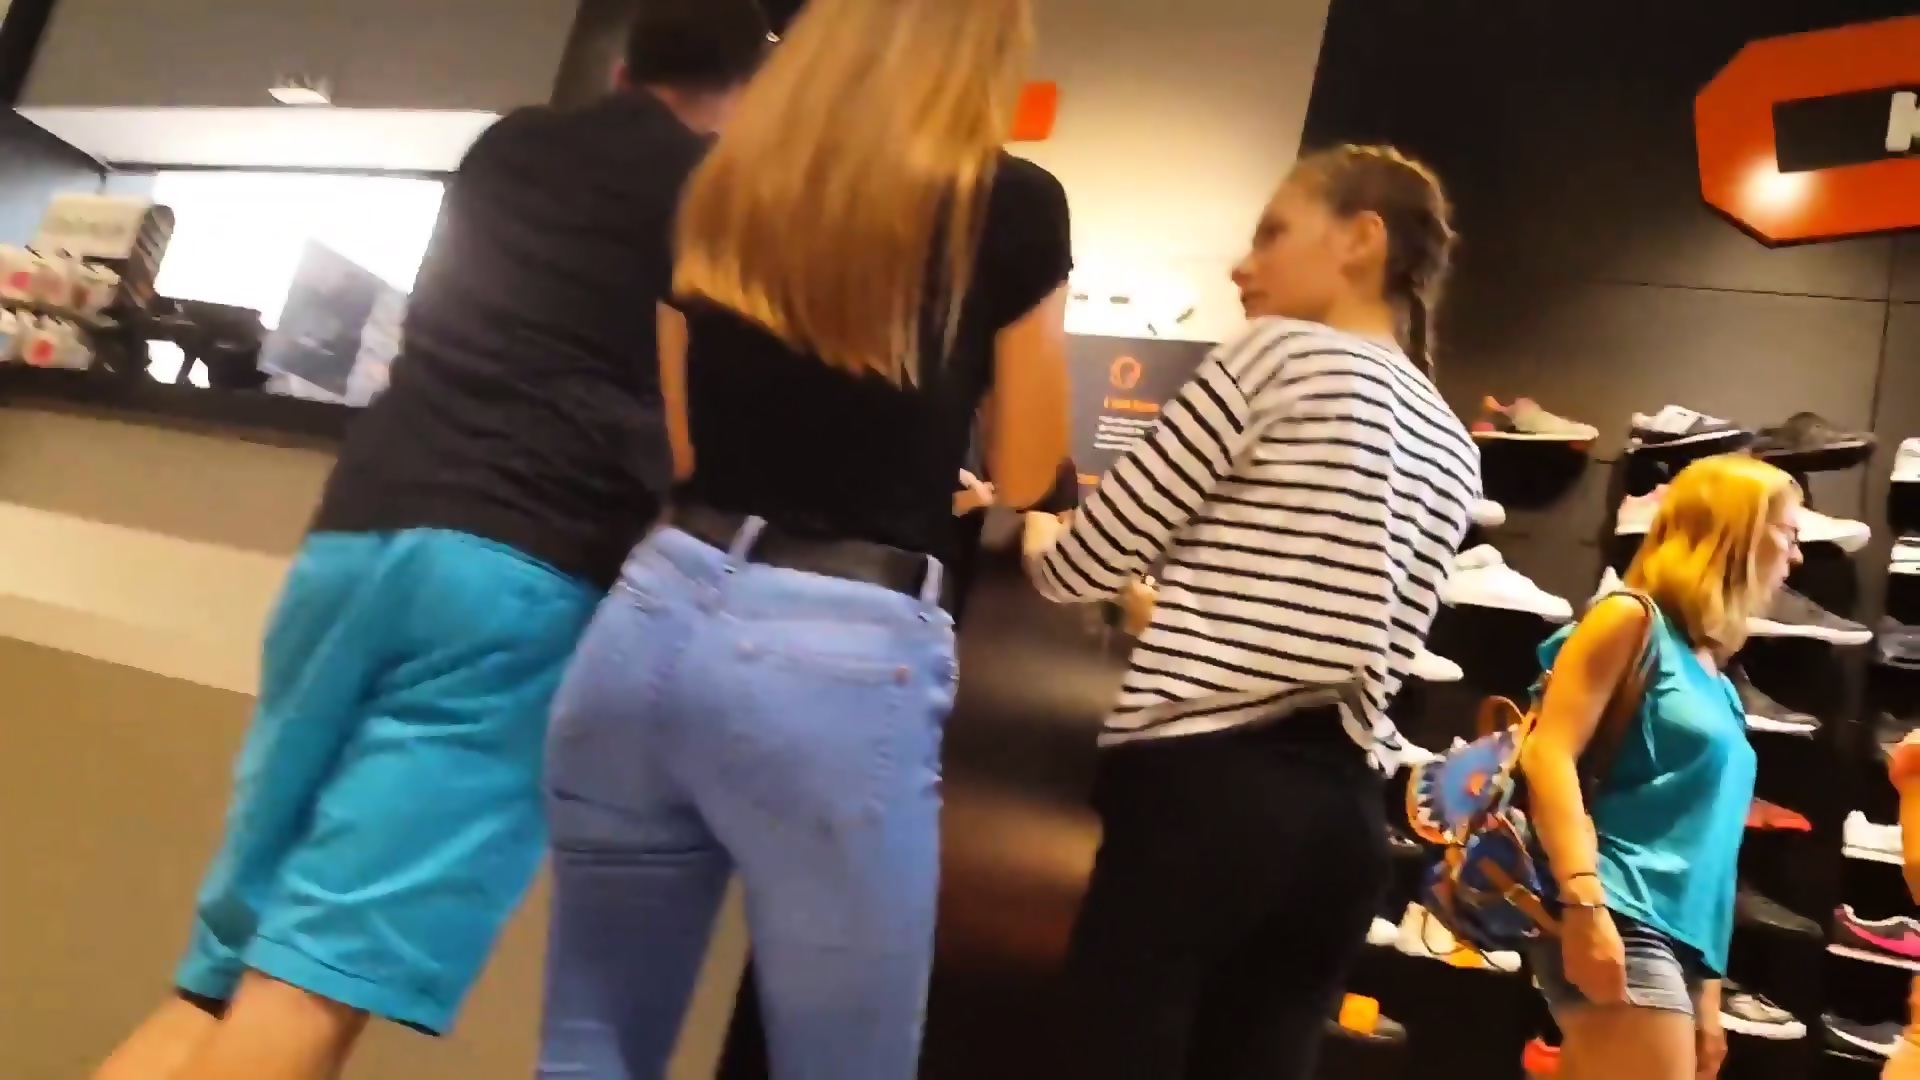 Candid Ass In Jeans image